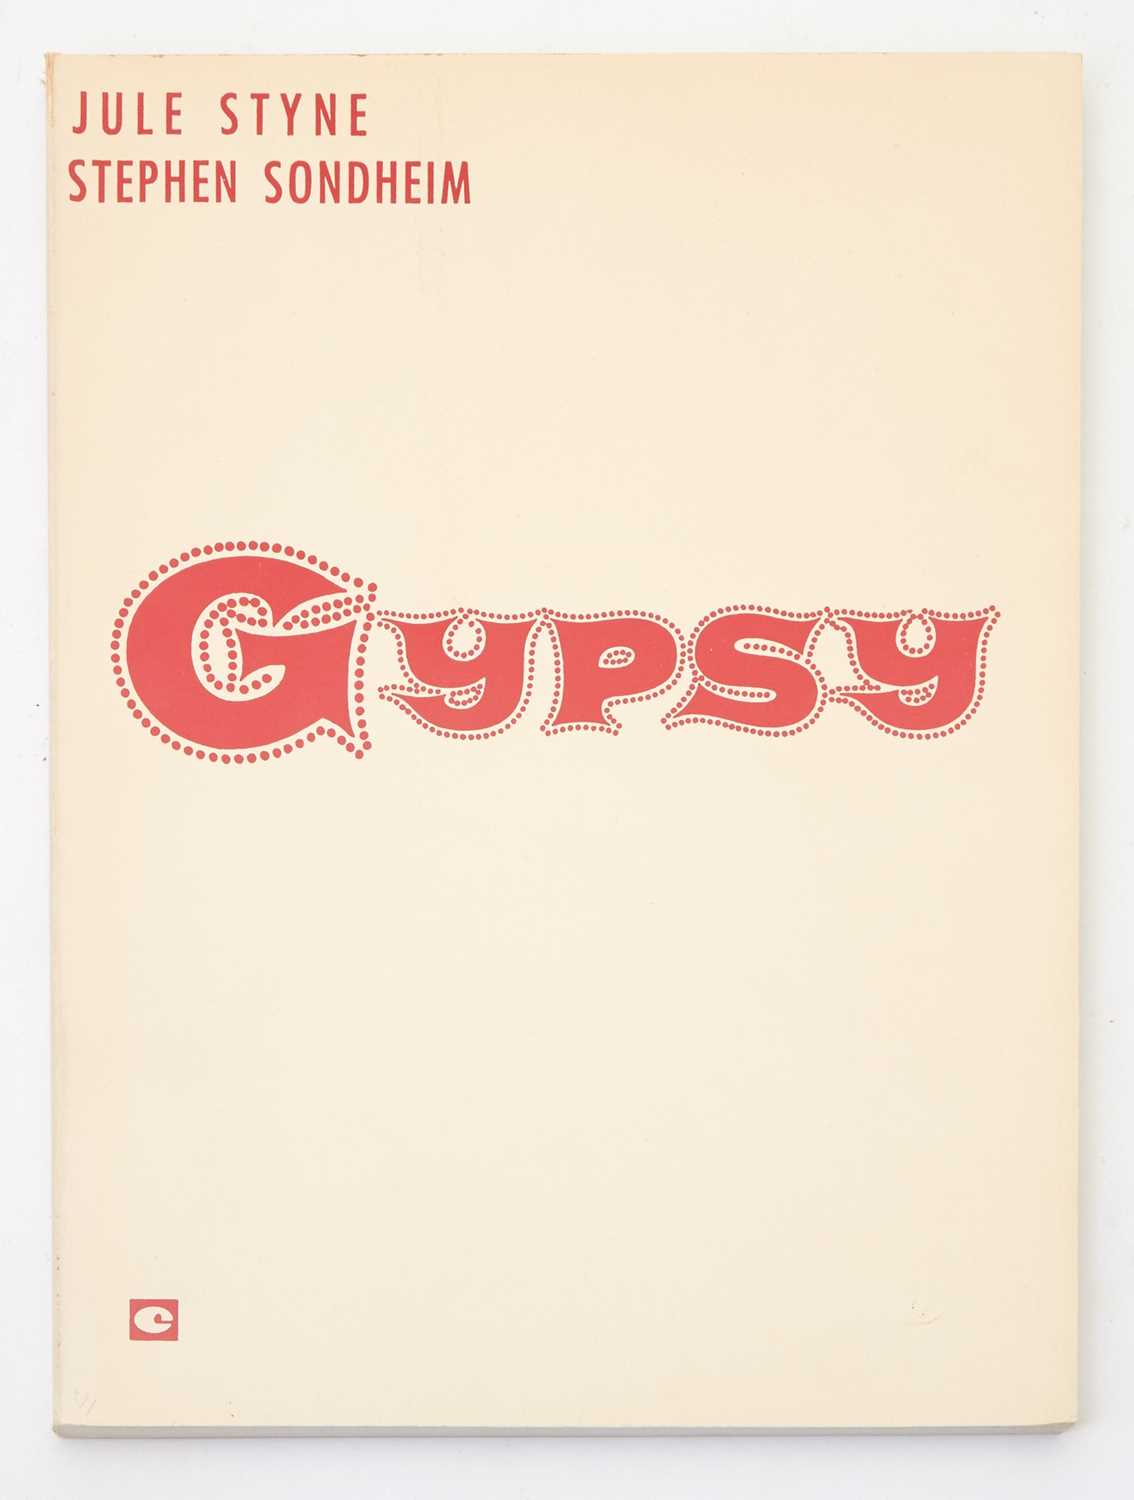 Lot 269 - The vocal score of Gypsy, inscribed to Stephen Sondheim by Jule Styne